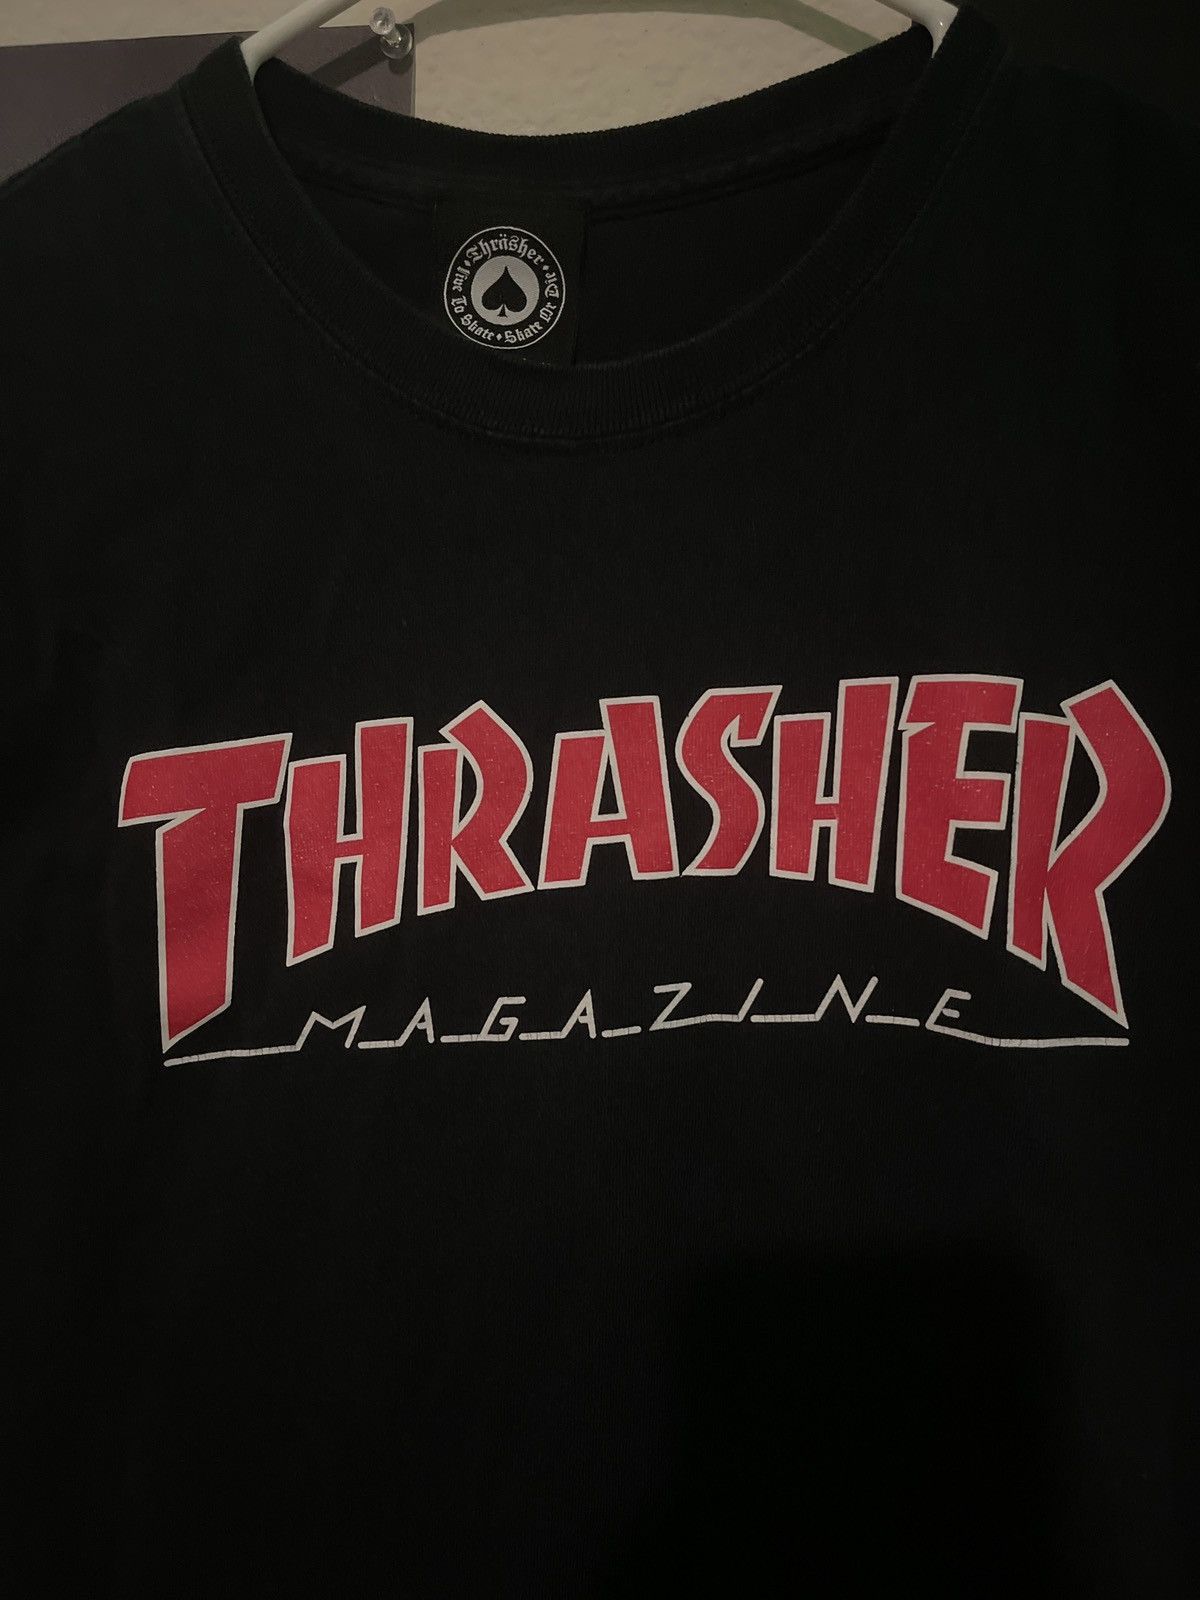 Vintage Thrasher Tee Gently Used Size US M / EU 48-50 / 2 - 2 Preview